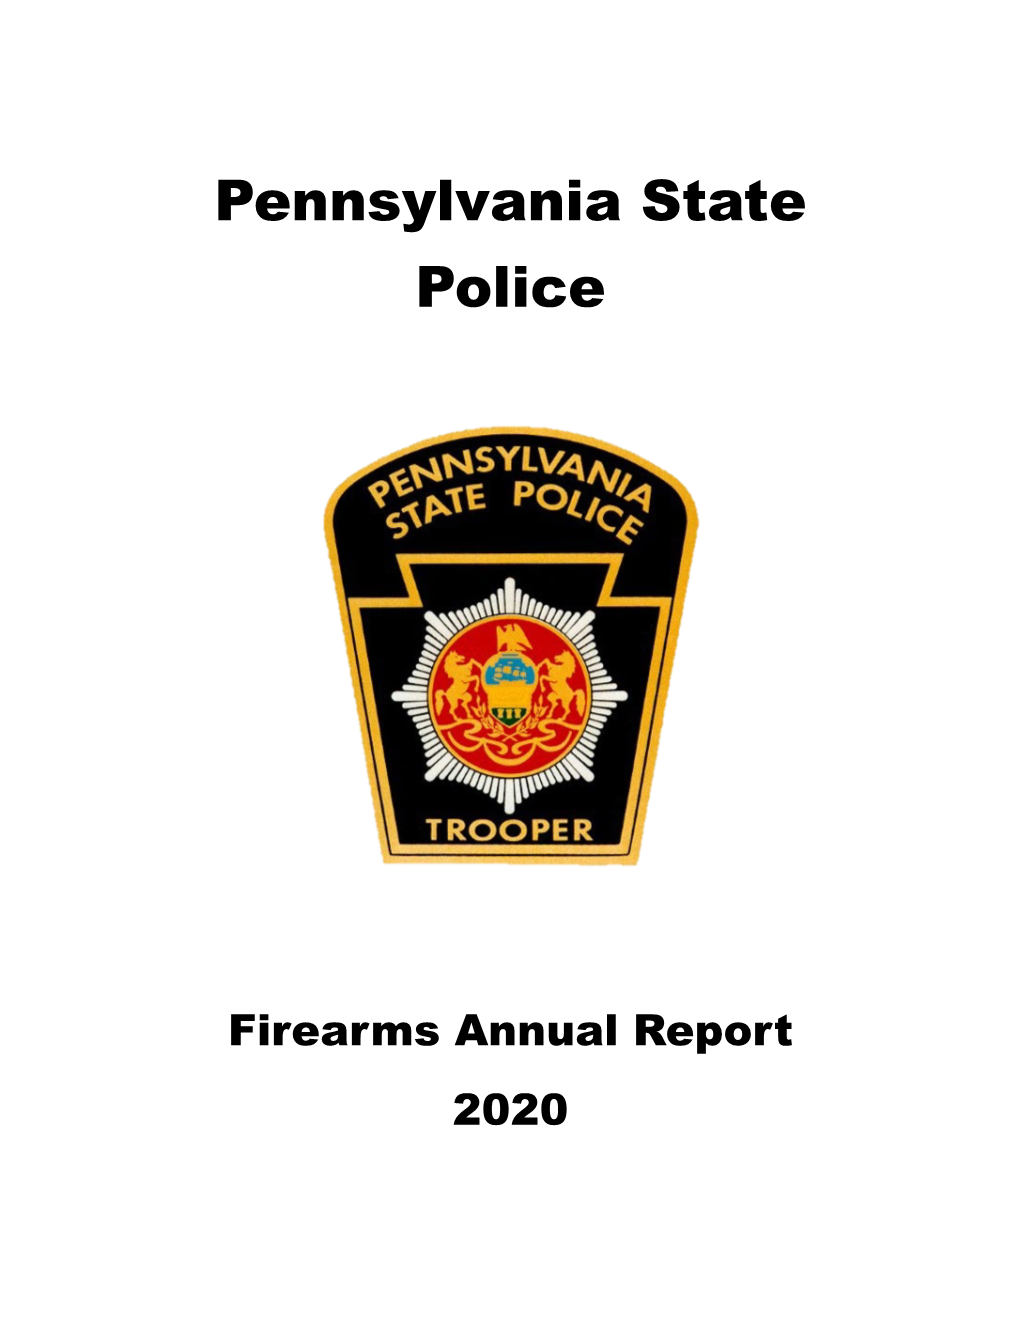 Pennsylvania State Police 2020 Firearms Annual Report